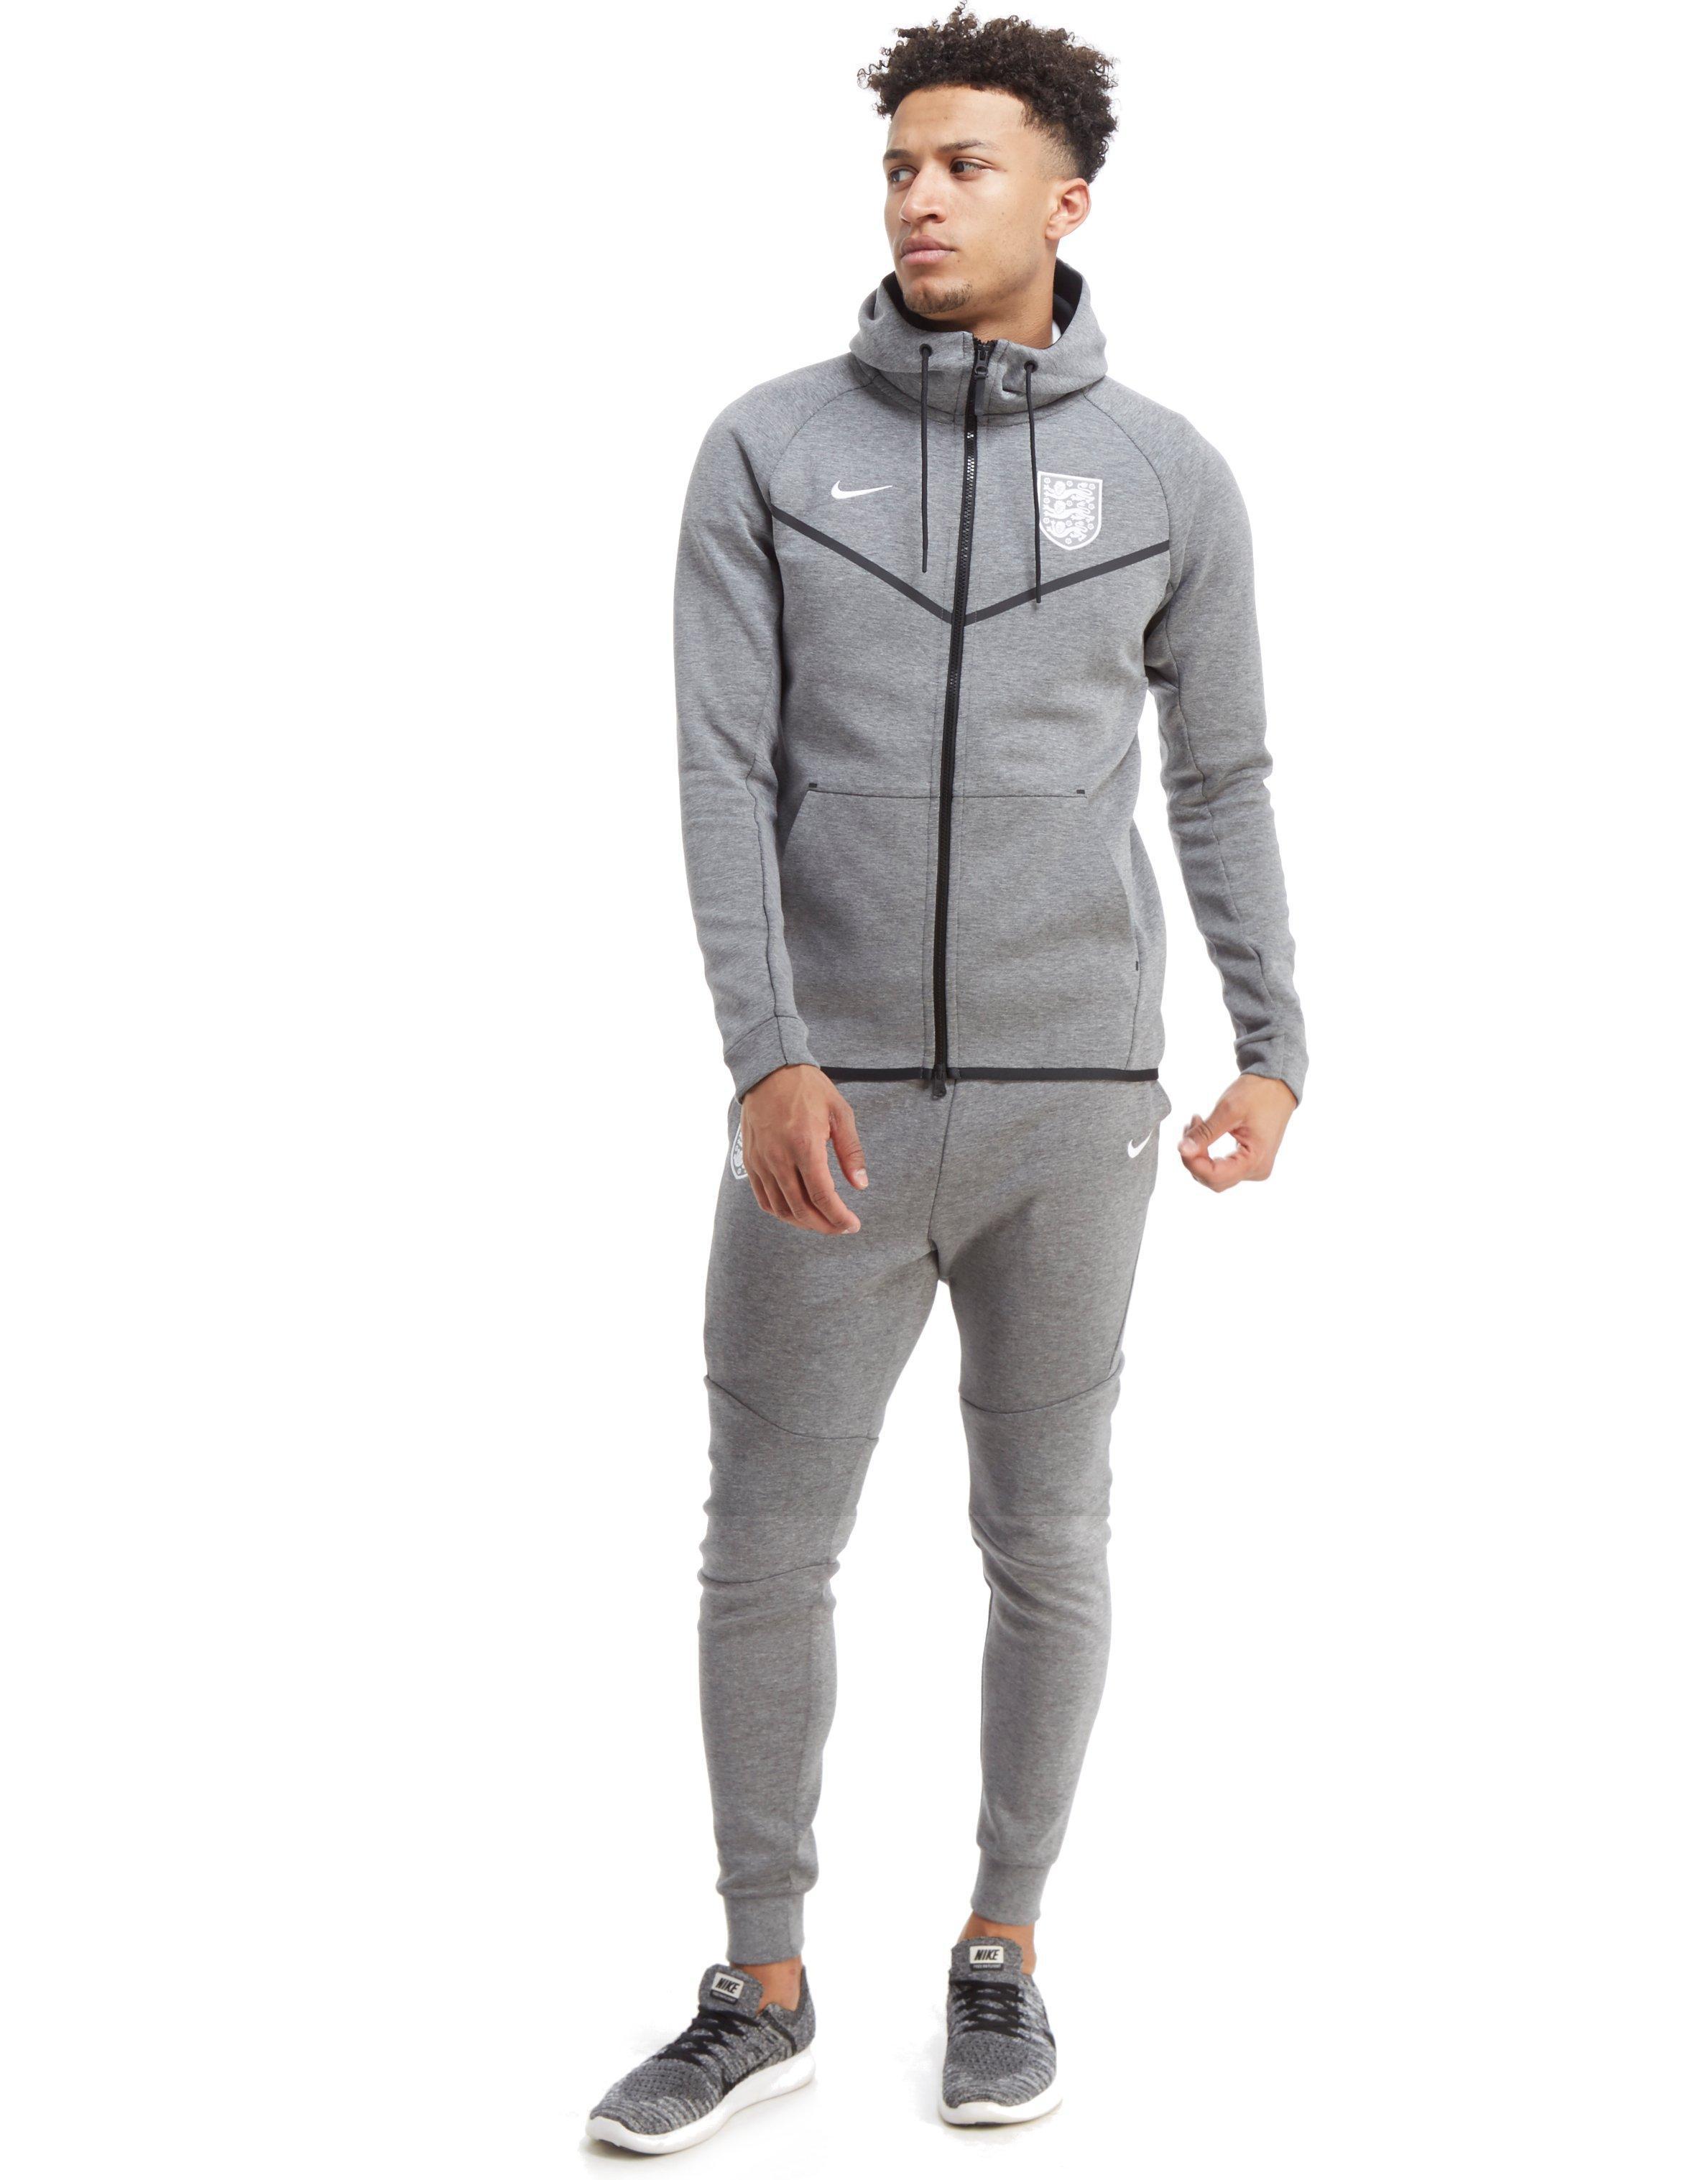 Nike Sweat Suits For Women